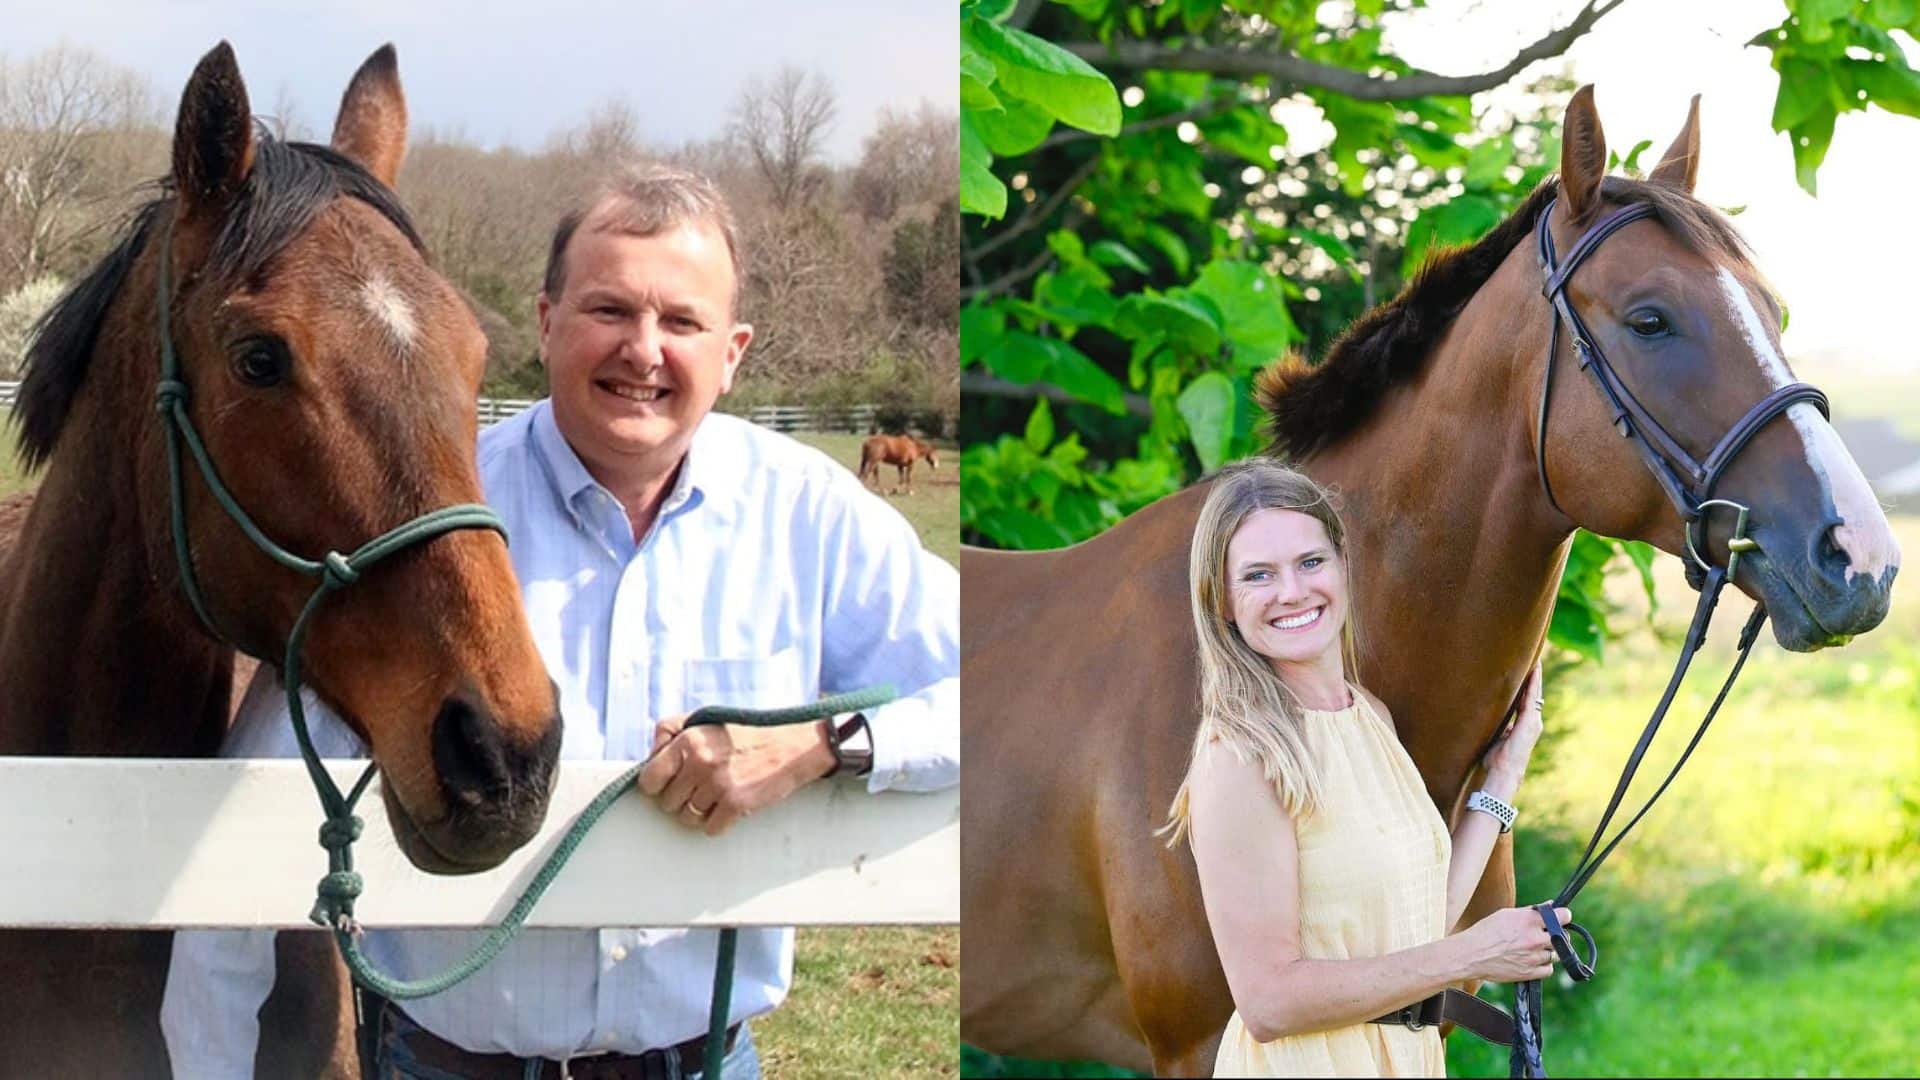 Featured image for “Retired Racehorse Project Elects New Board Members and Officers, Establishes Advisory Council”